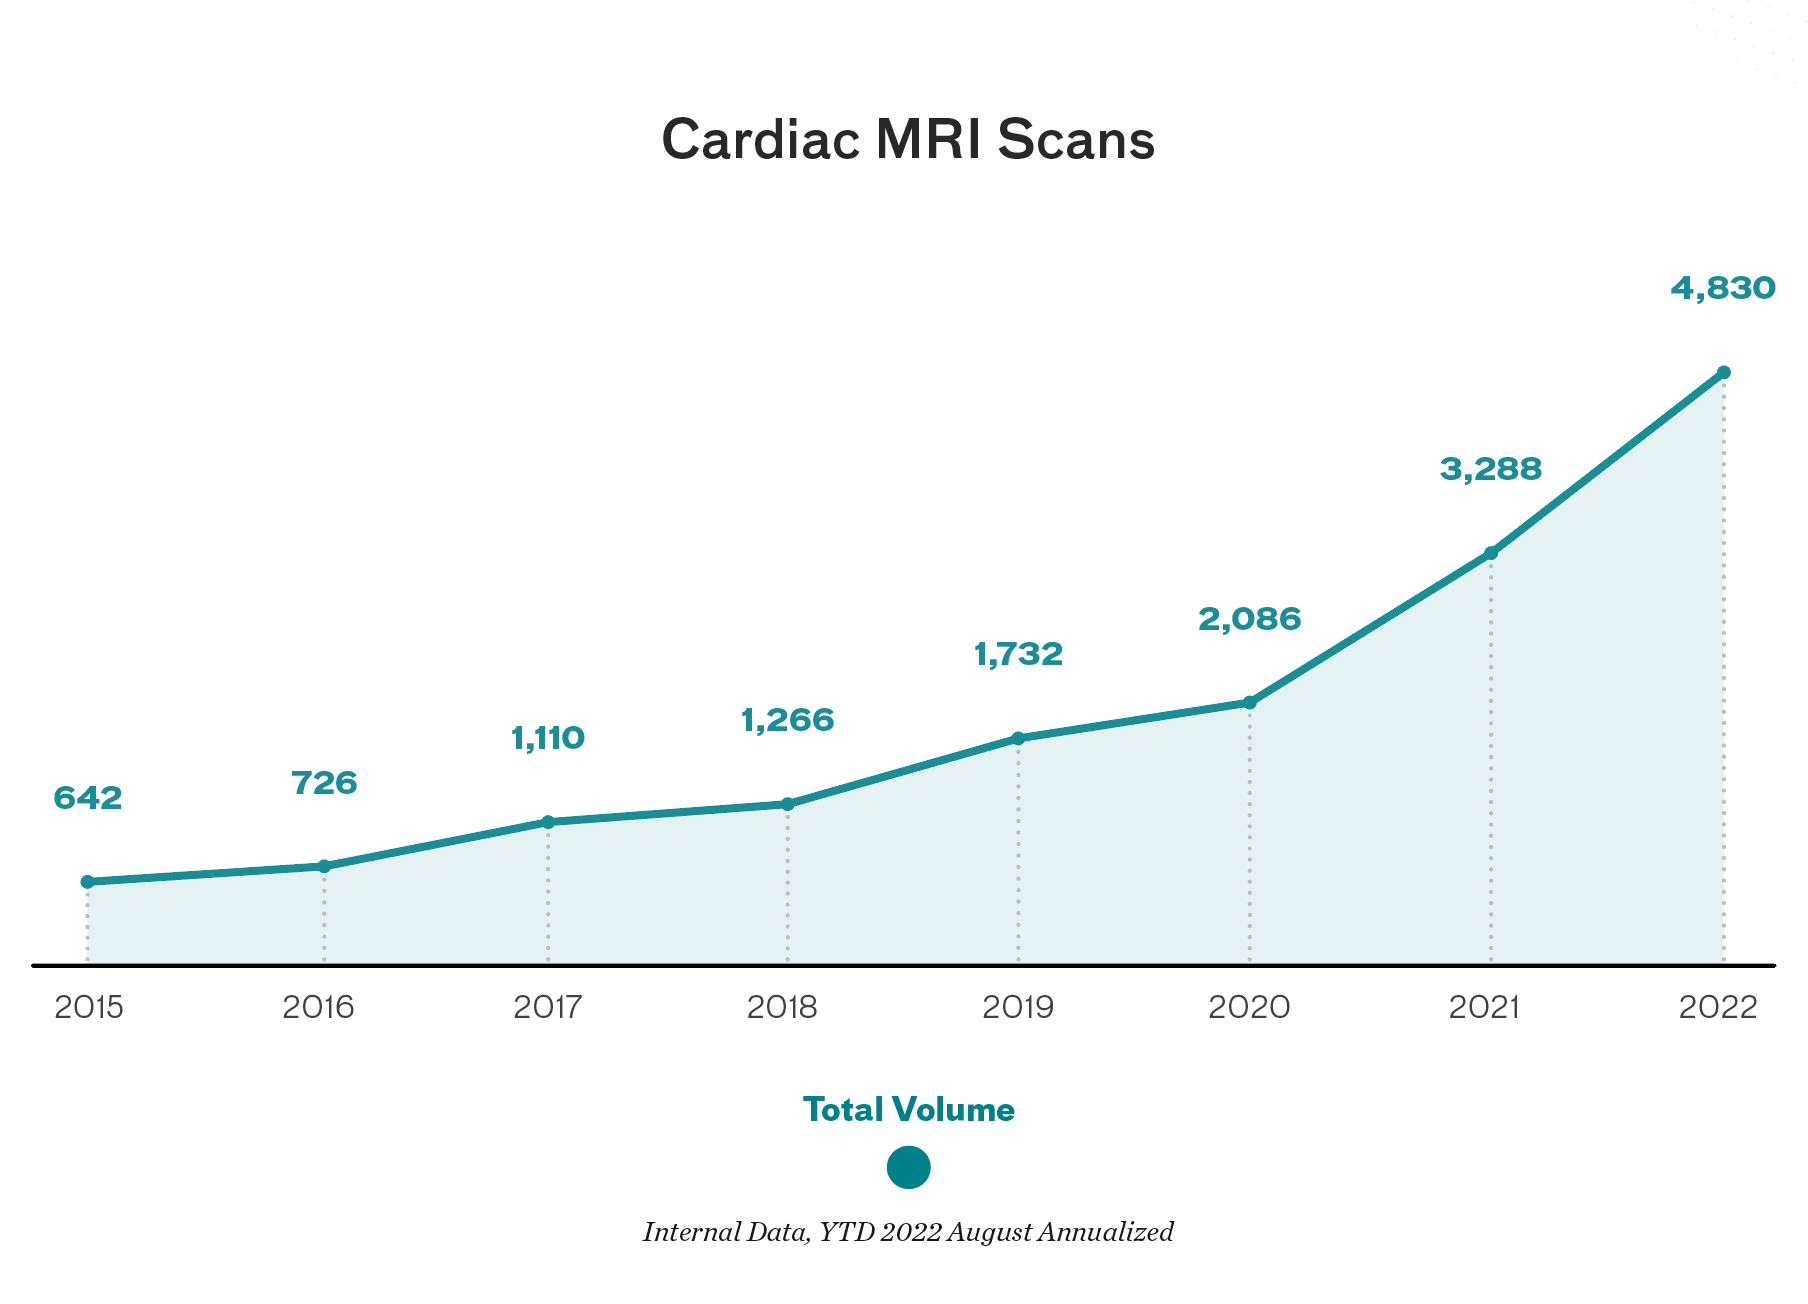 Chart showing an increase in Cardiac MRI Scans, from 642 in 2015, to 4,830 in 2022.